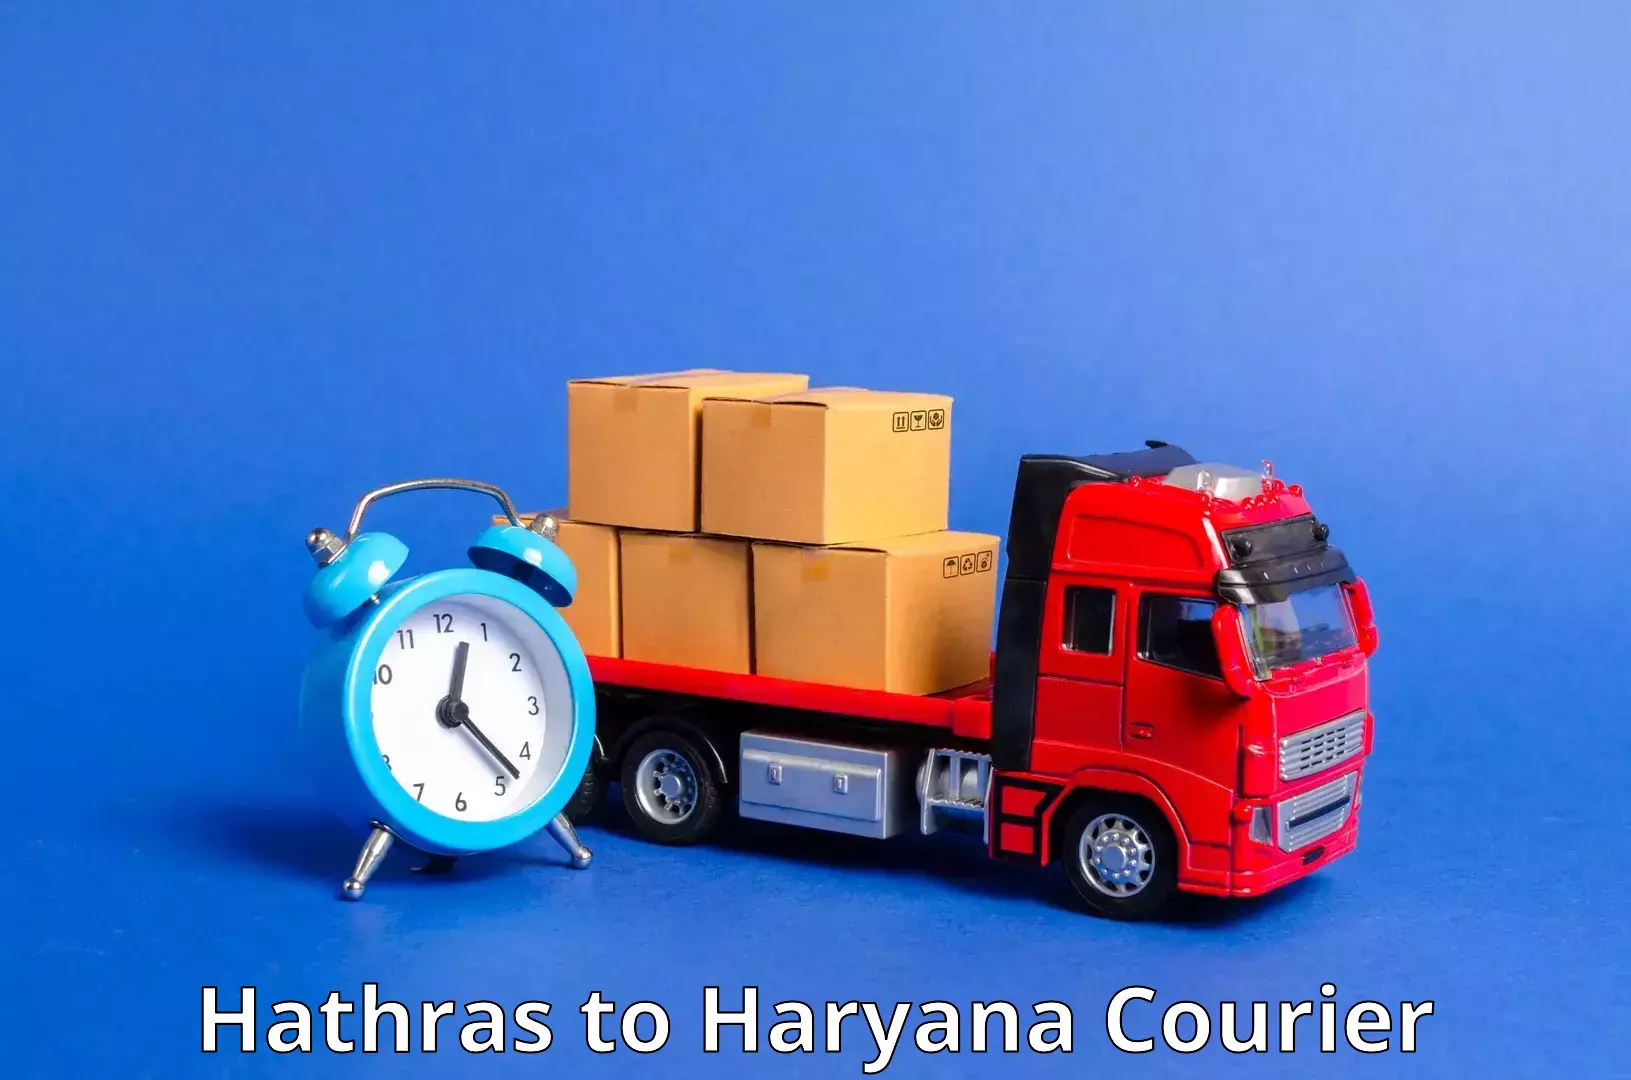 High-speed parcel service Hathras to Panipat